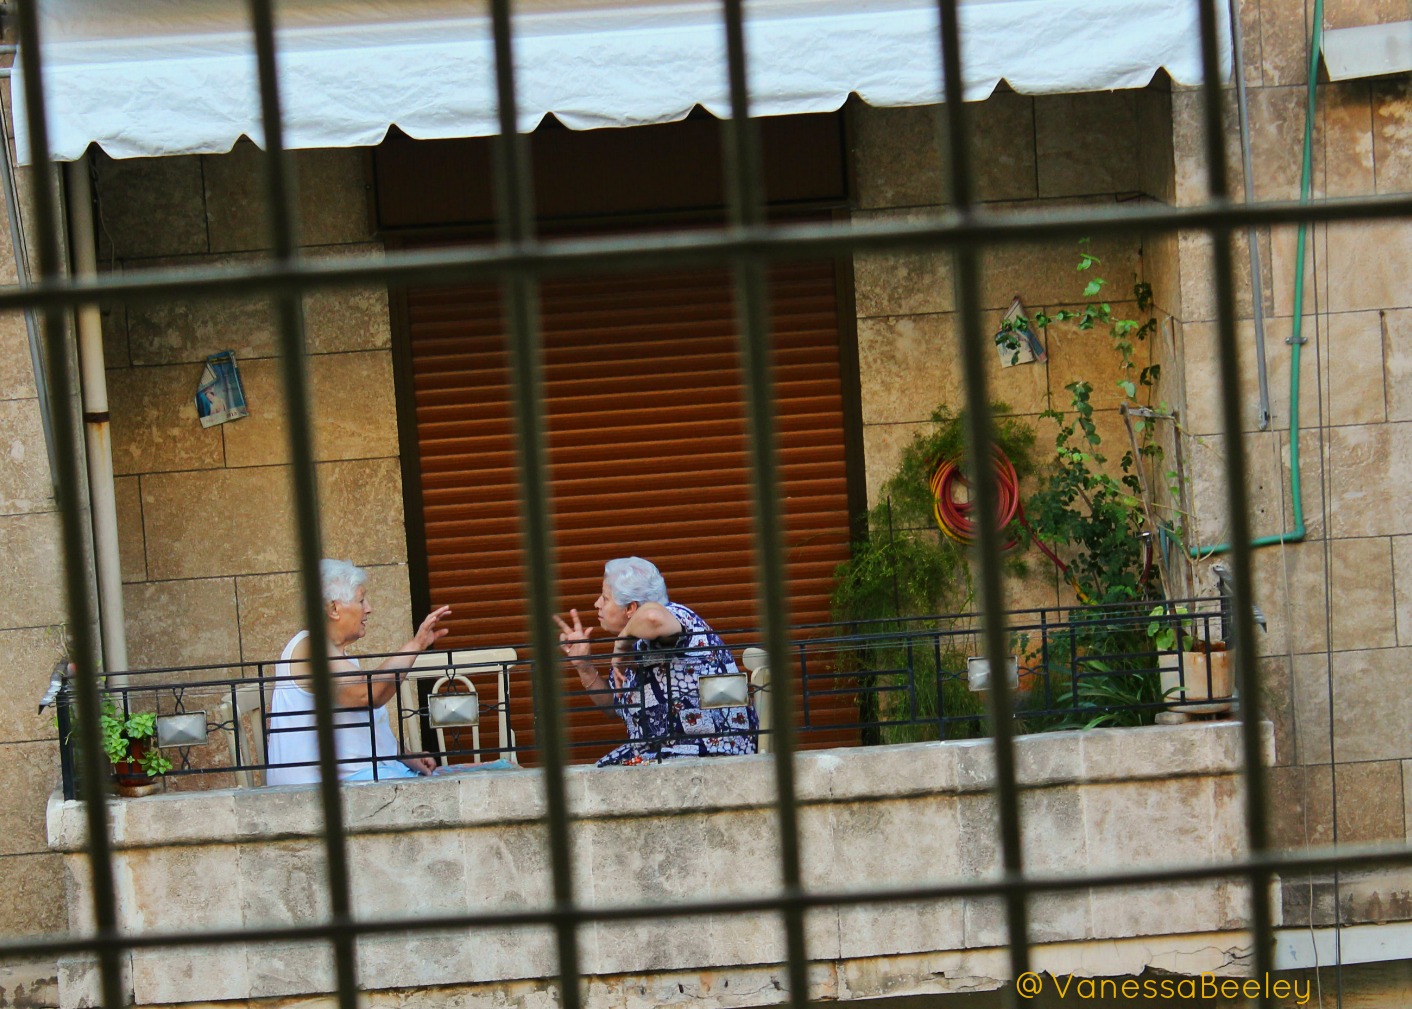 Two ladies have an animated chat at dawn in Aziziya, western Aleppo. (Photo by Vanessa Beeley)